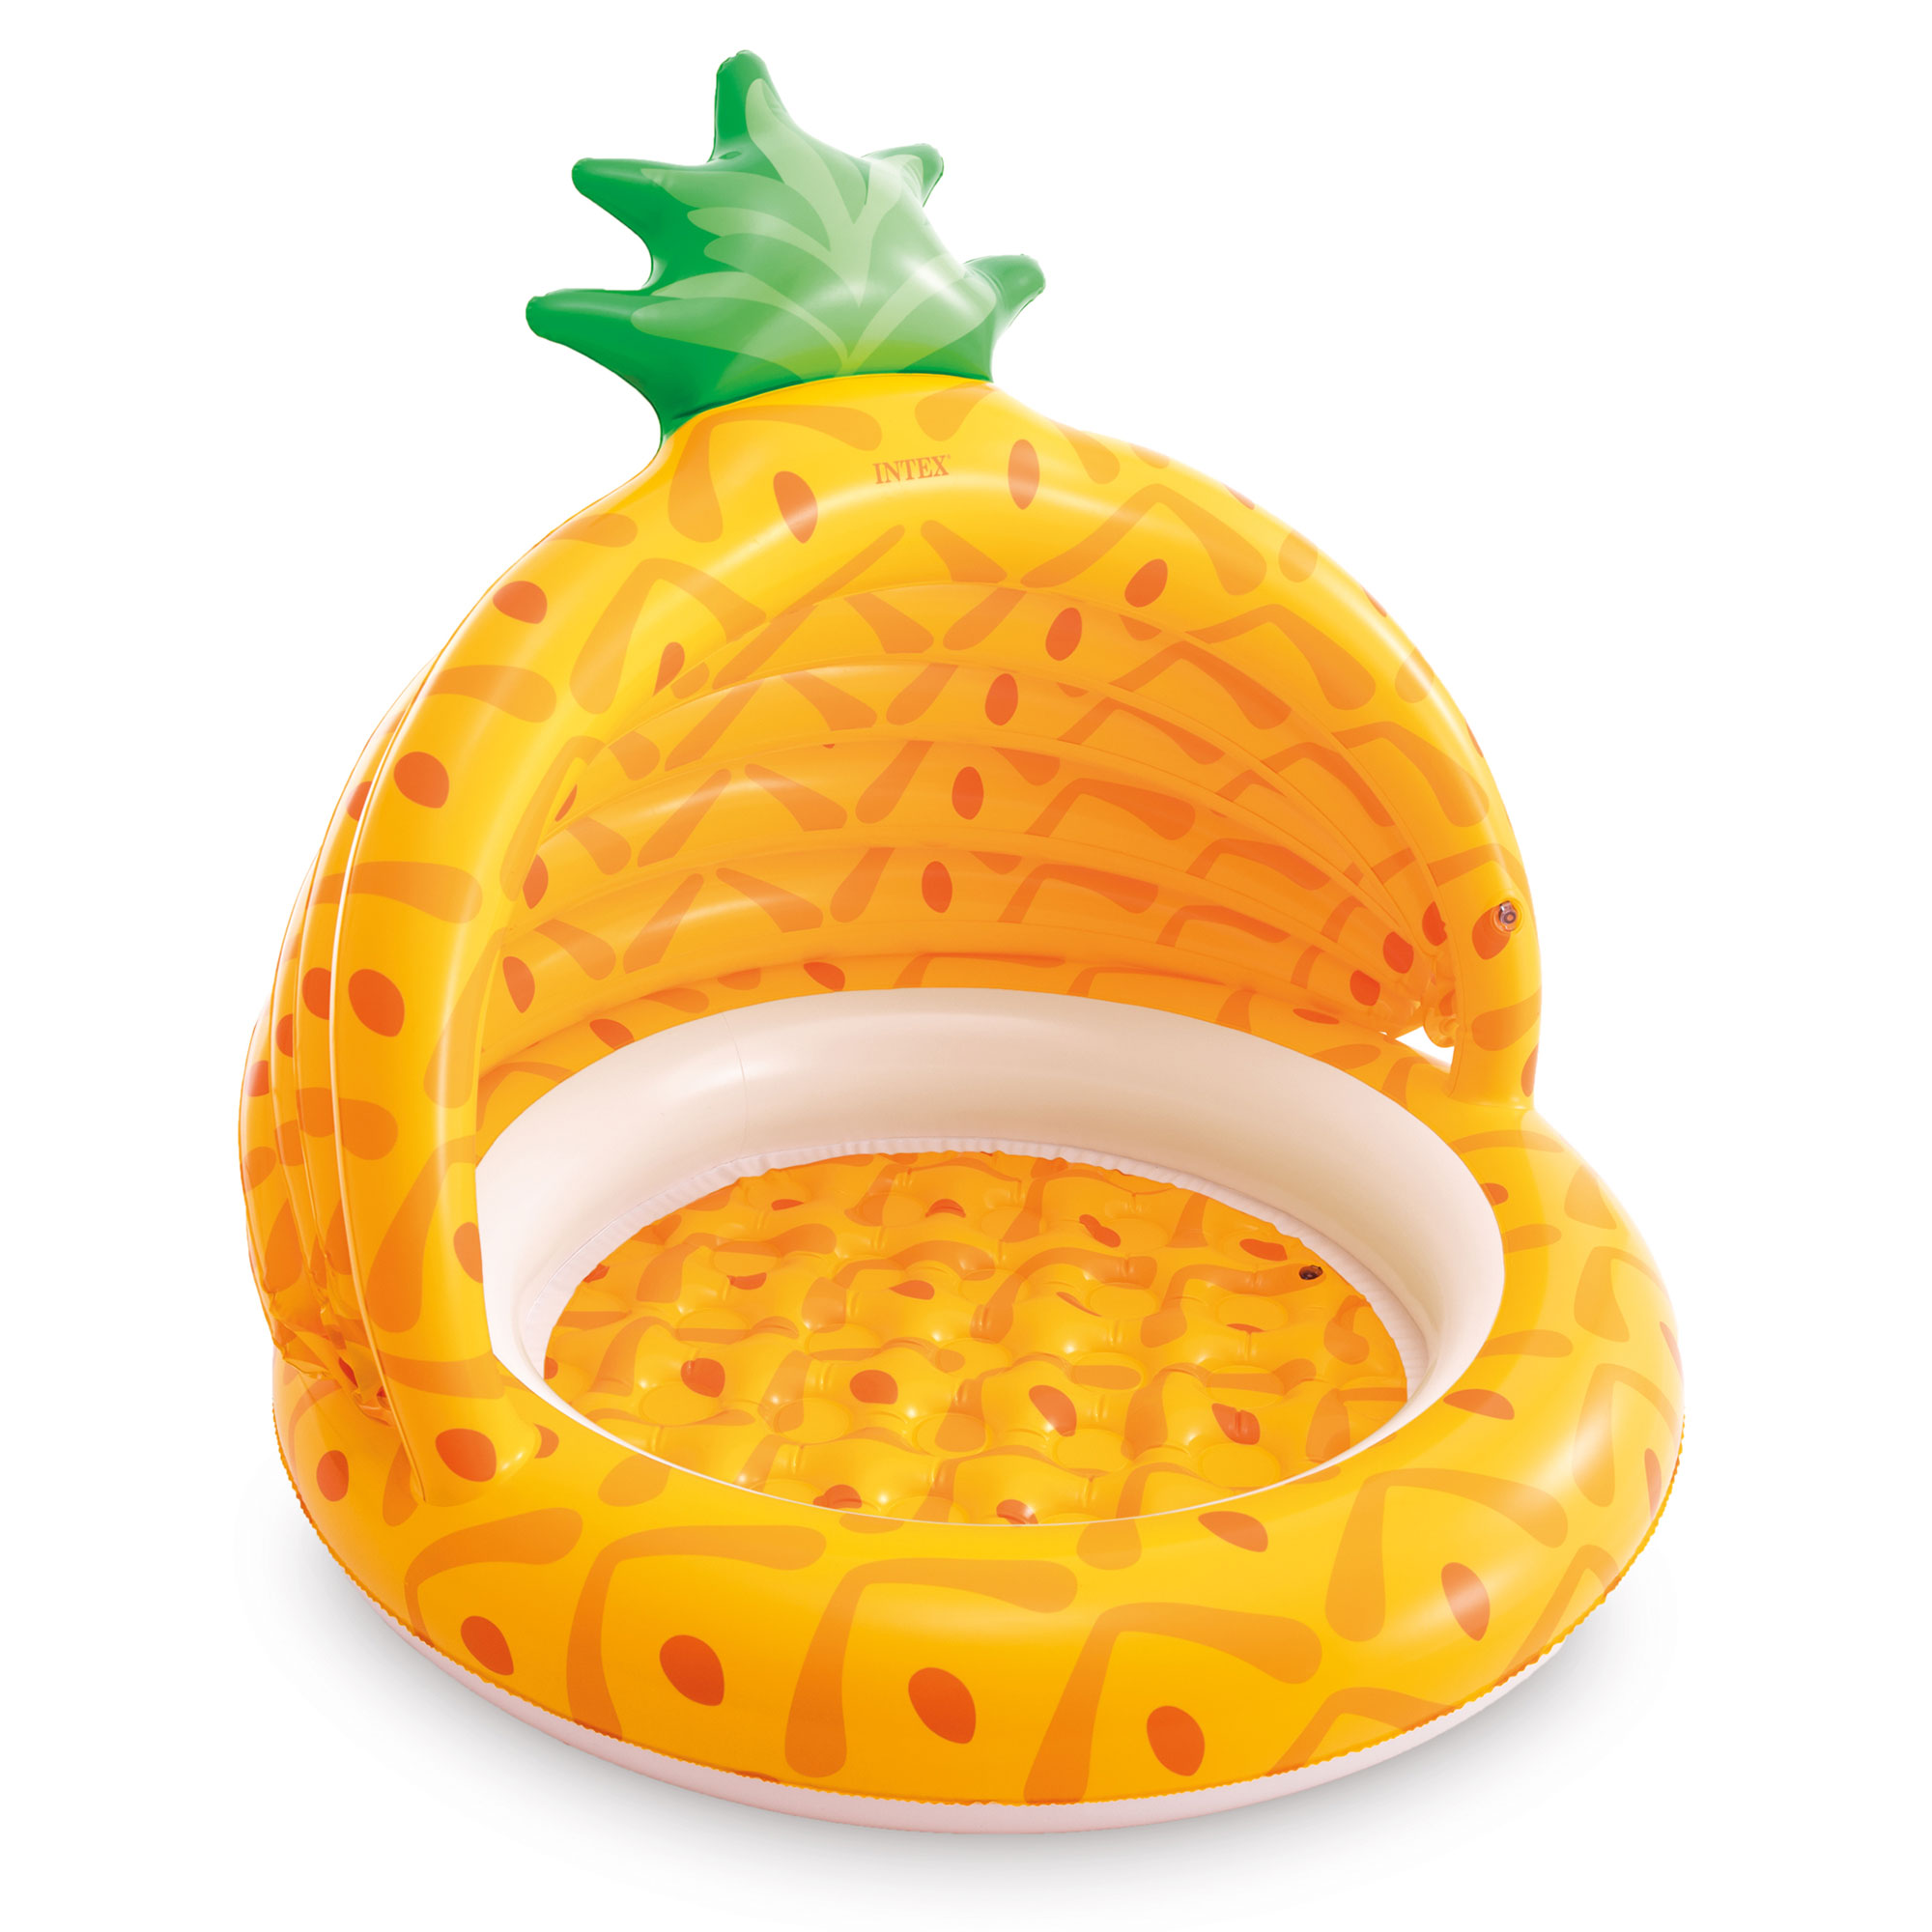 Intex 58414EP 40 Inch Pineapple Outdoor Baby Toddler Inflatable Swimming Pool - image 1 of 3